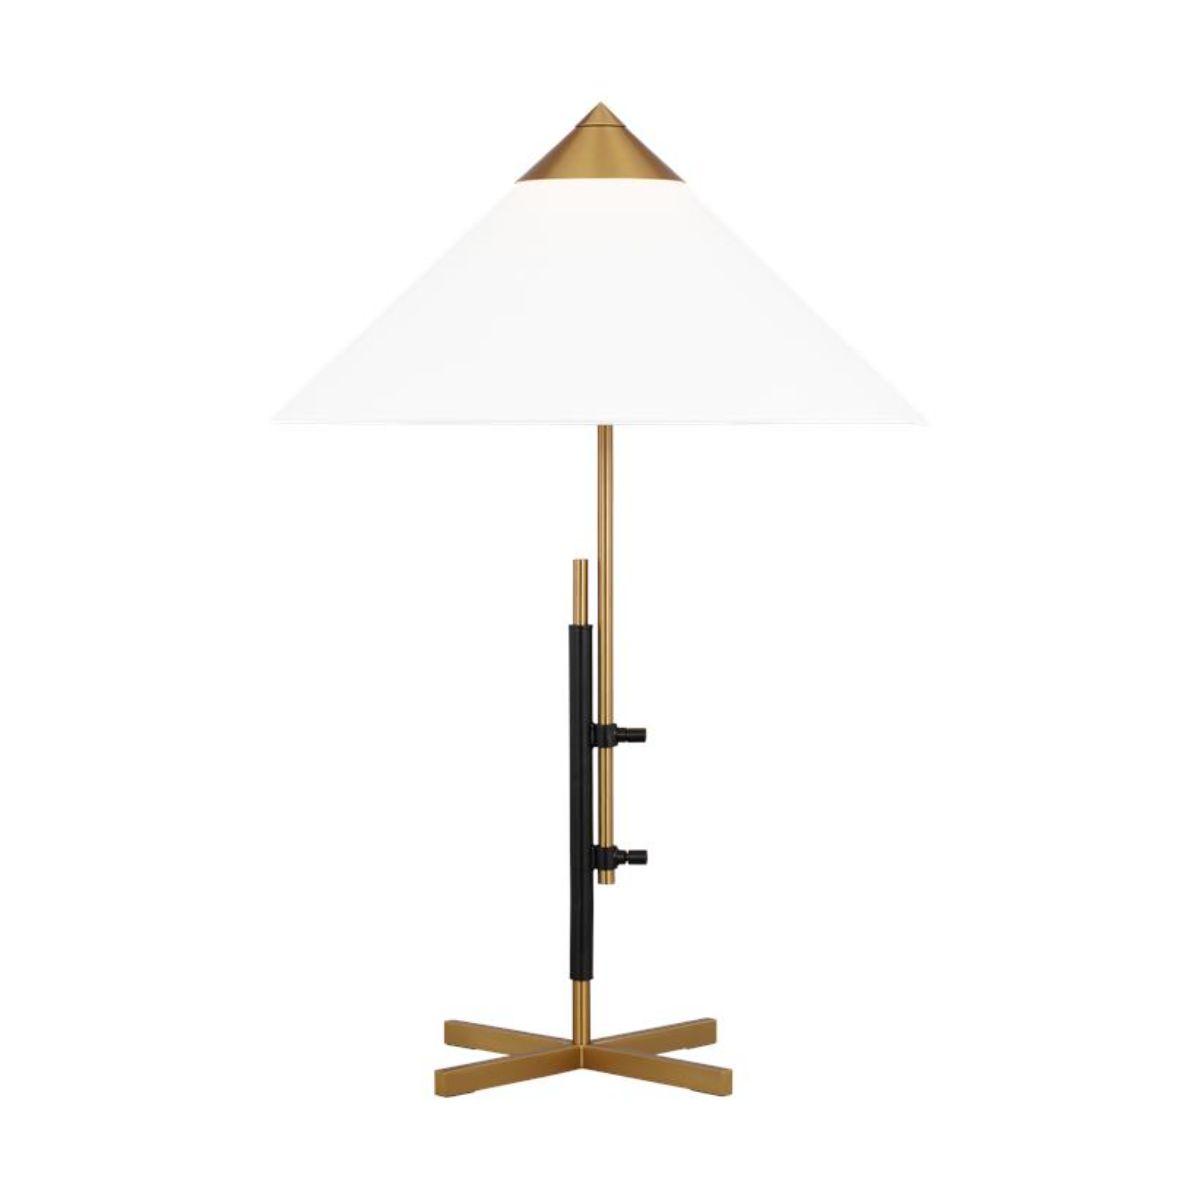 Franklin Table Lamp Burnished Brass and Deep Bronze Finish